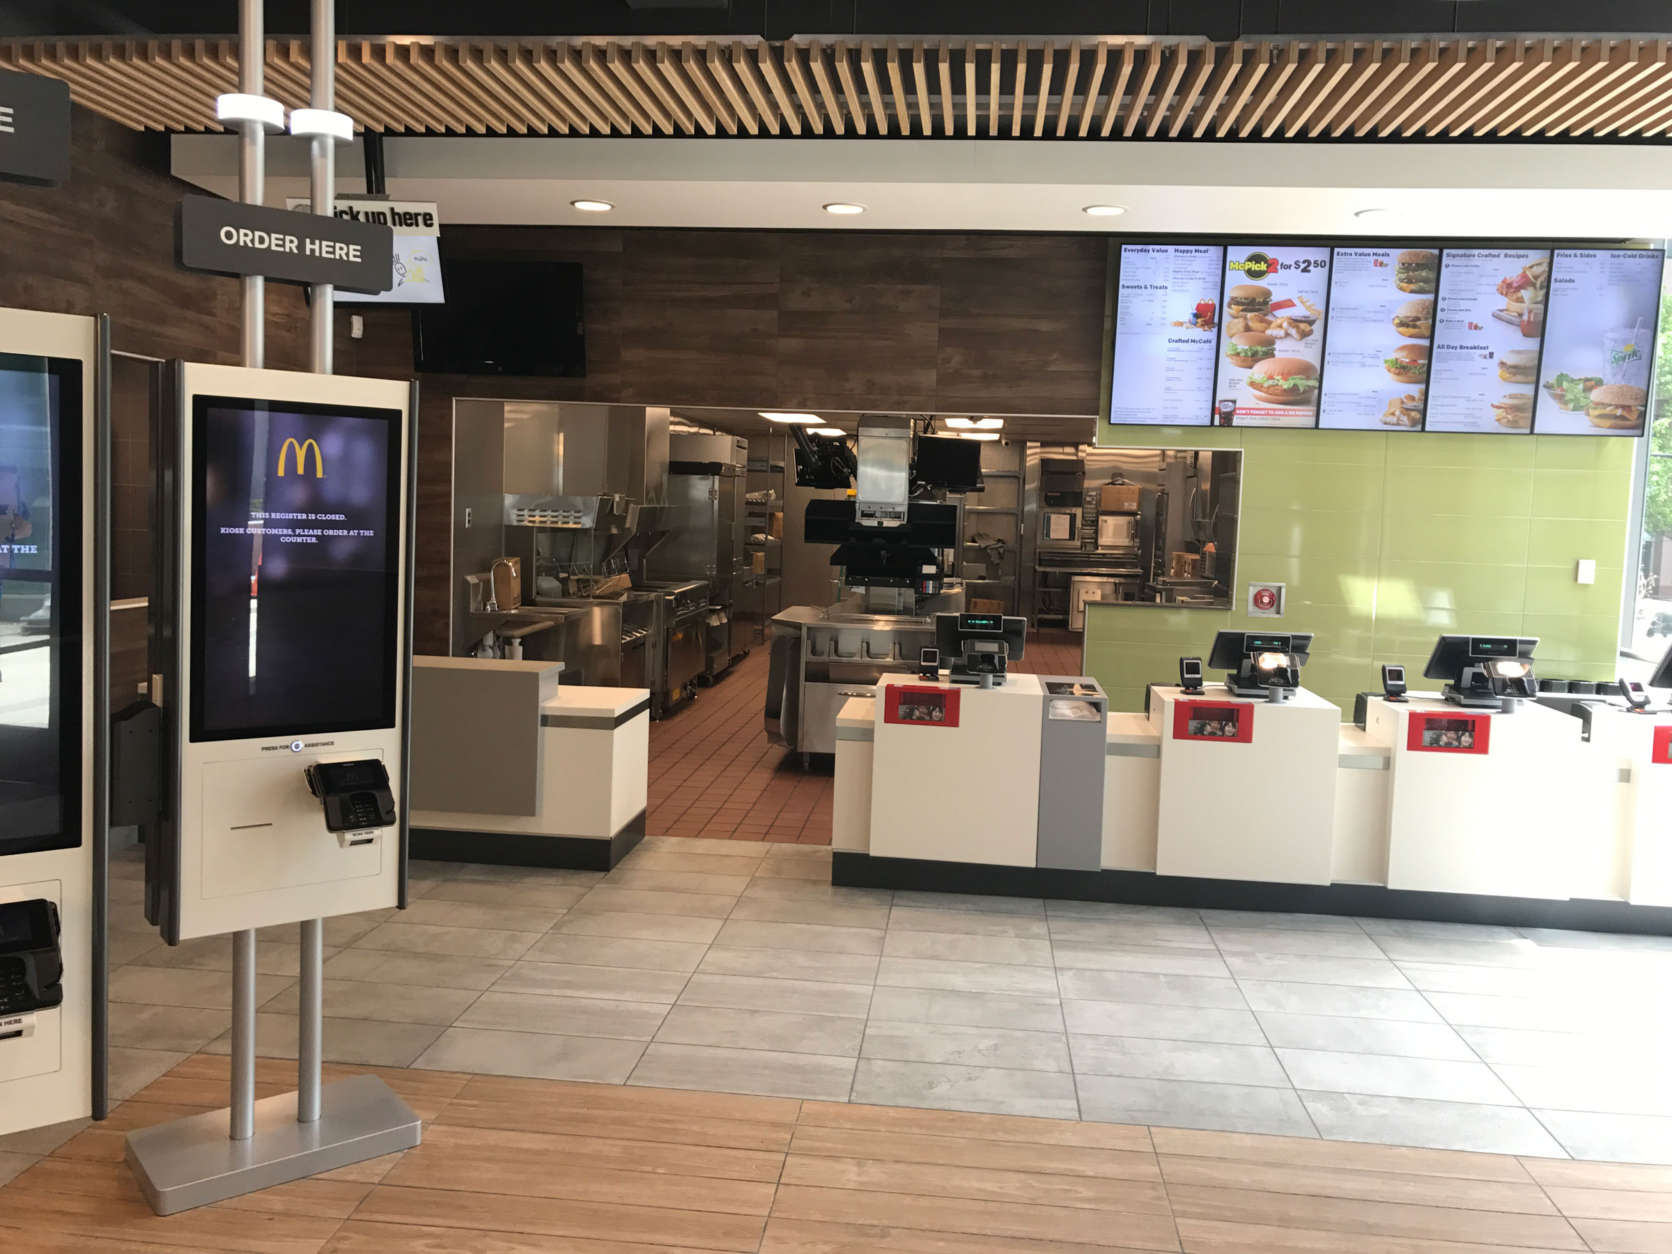 The Rosslyn McDonald’s will also have kiosk ordering and table service, with orders delivered to tables by McDonald’s employees. (Courtesy McDonald's)